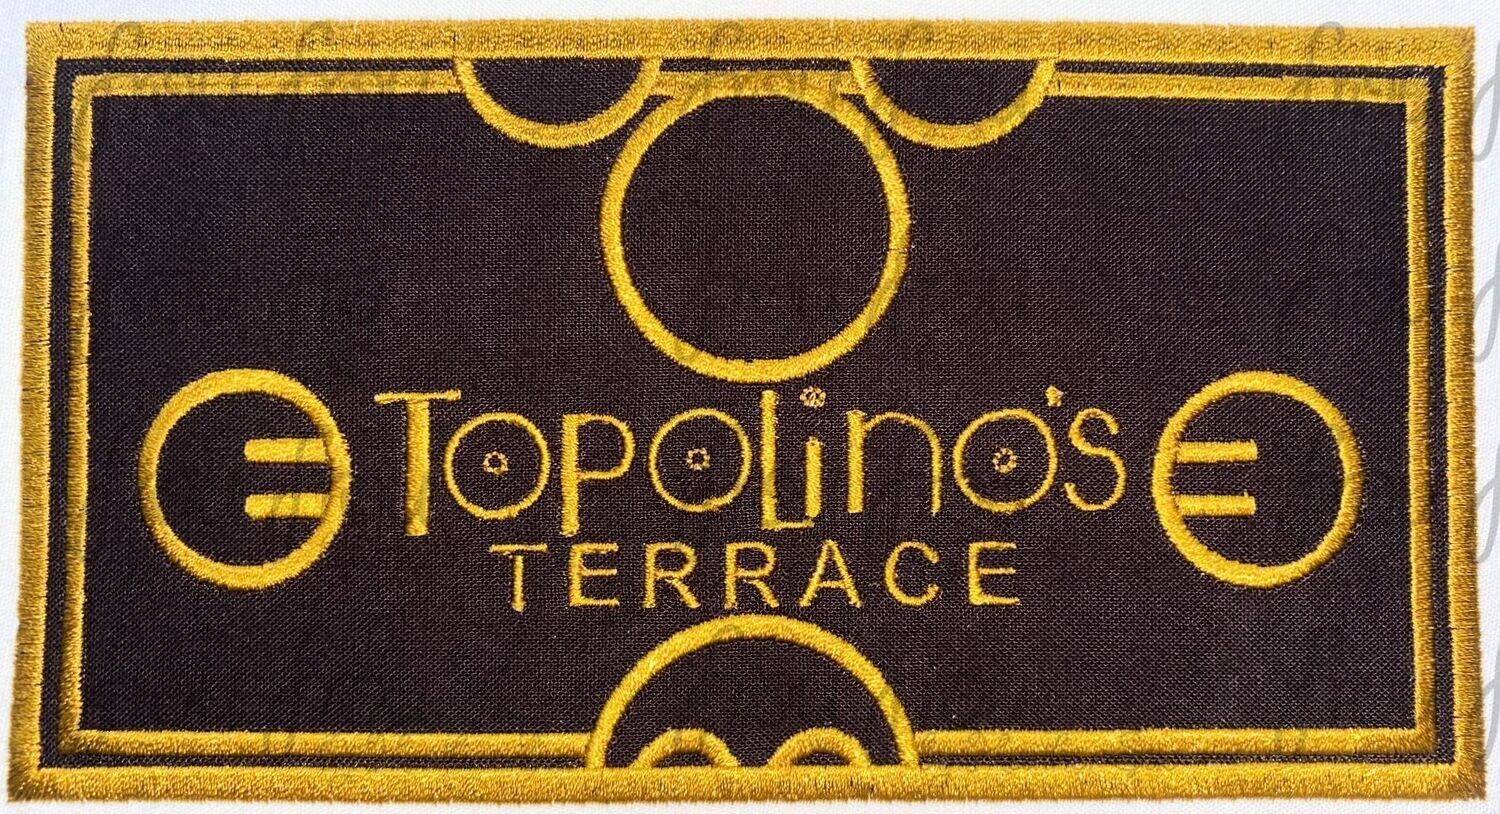 Top Olino's Terrace Restaurant Machine Applique and filled Embroidery Design, multiple sizes including 3.5"-16"